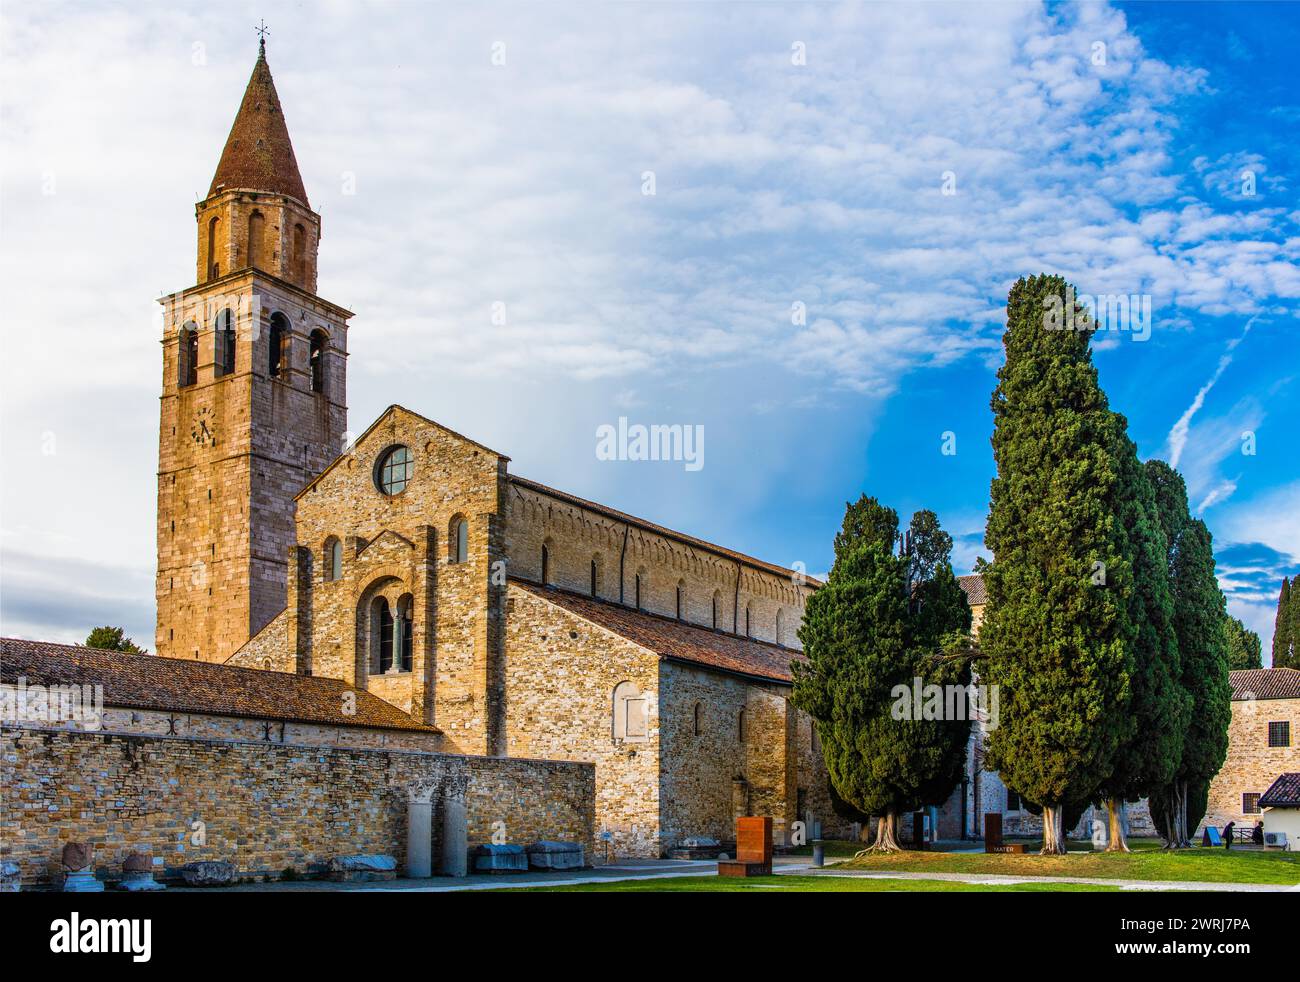 Basilica of Aquileia from the 11th century, largest floor mosaic of the Western Roman Empire, UNESCO World Heritage Site, important city in the Roman Stock Photo